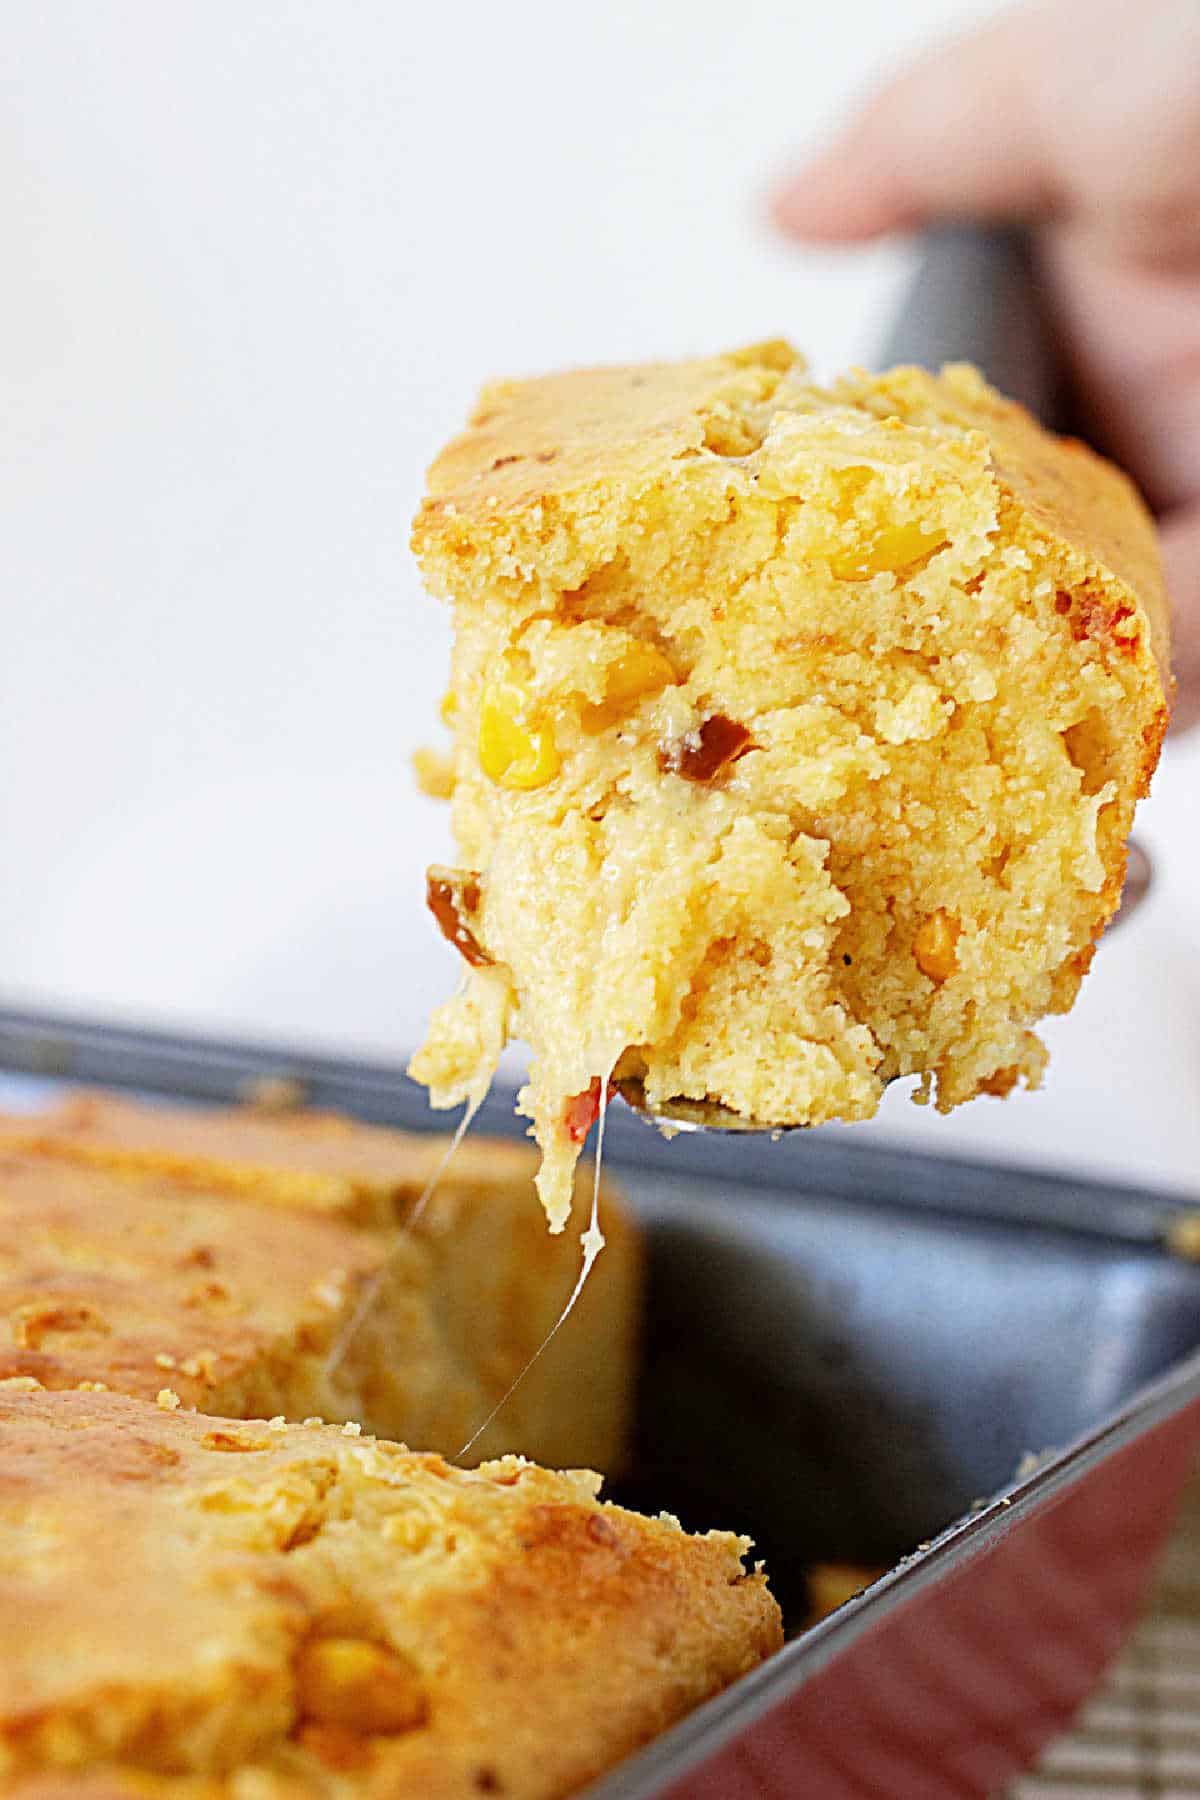 Cheesy piece of cornbread on a cake server over the metal pan with rest of bread.